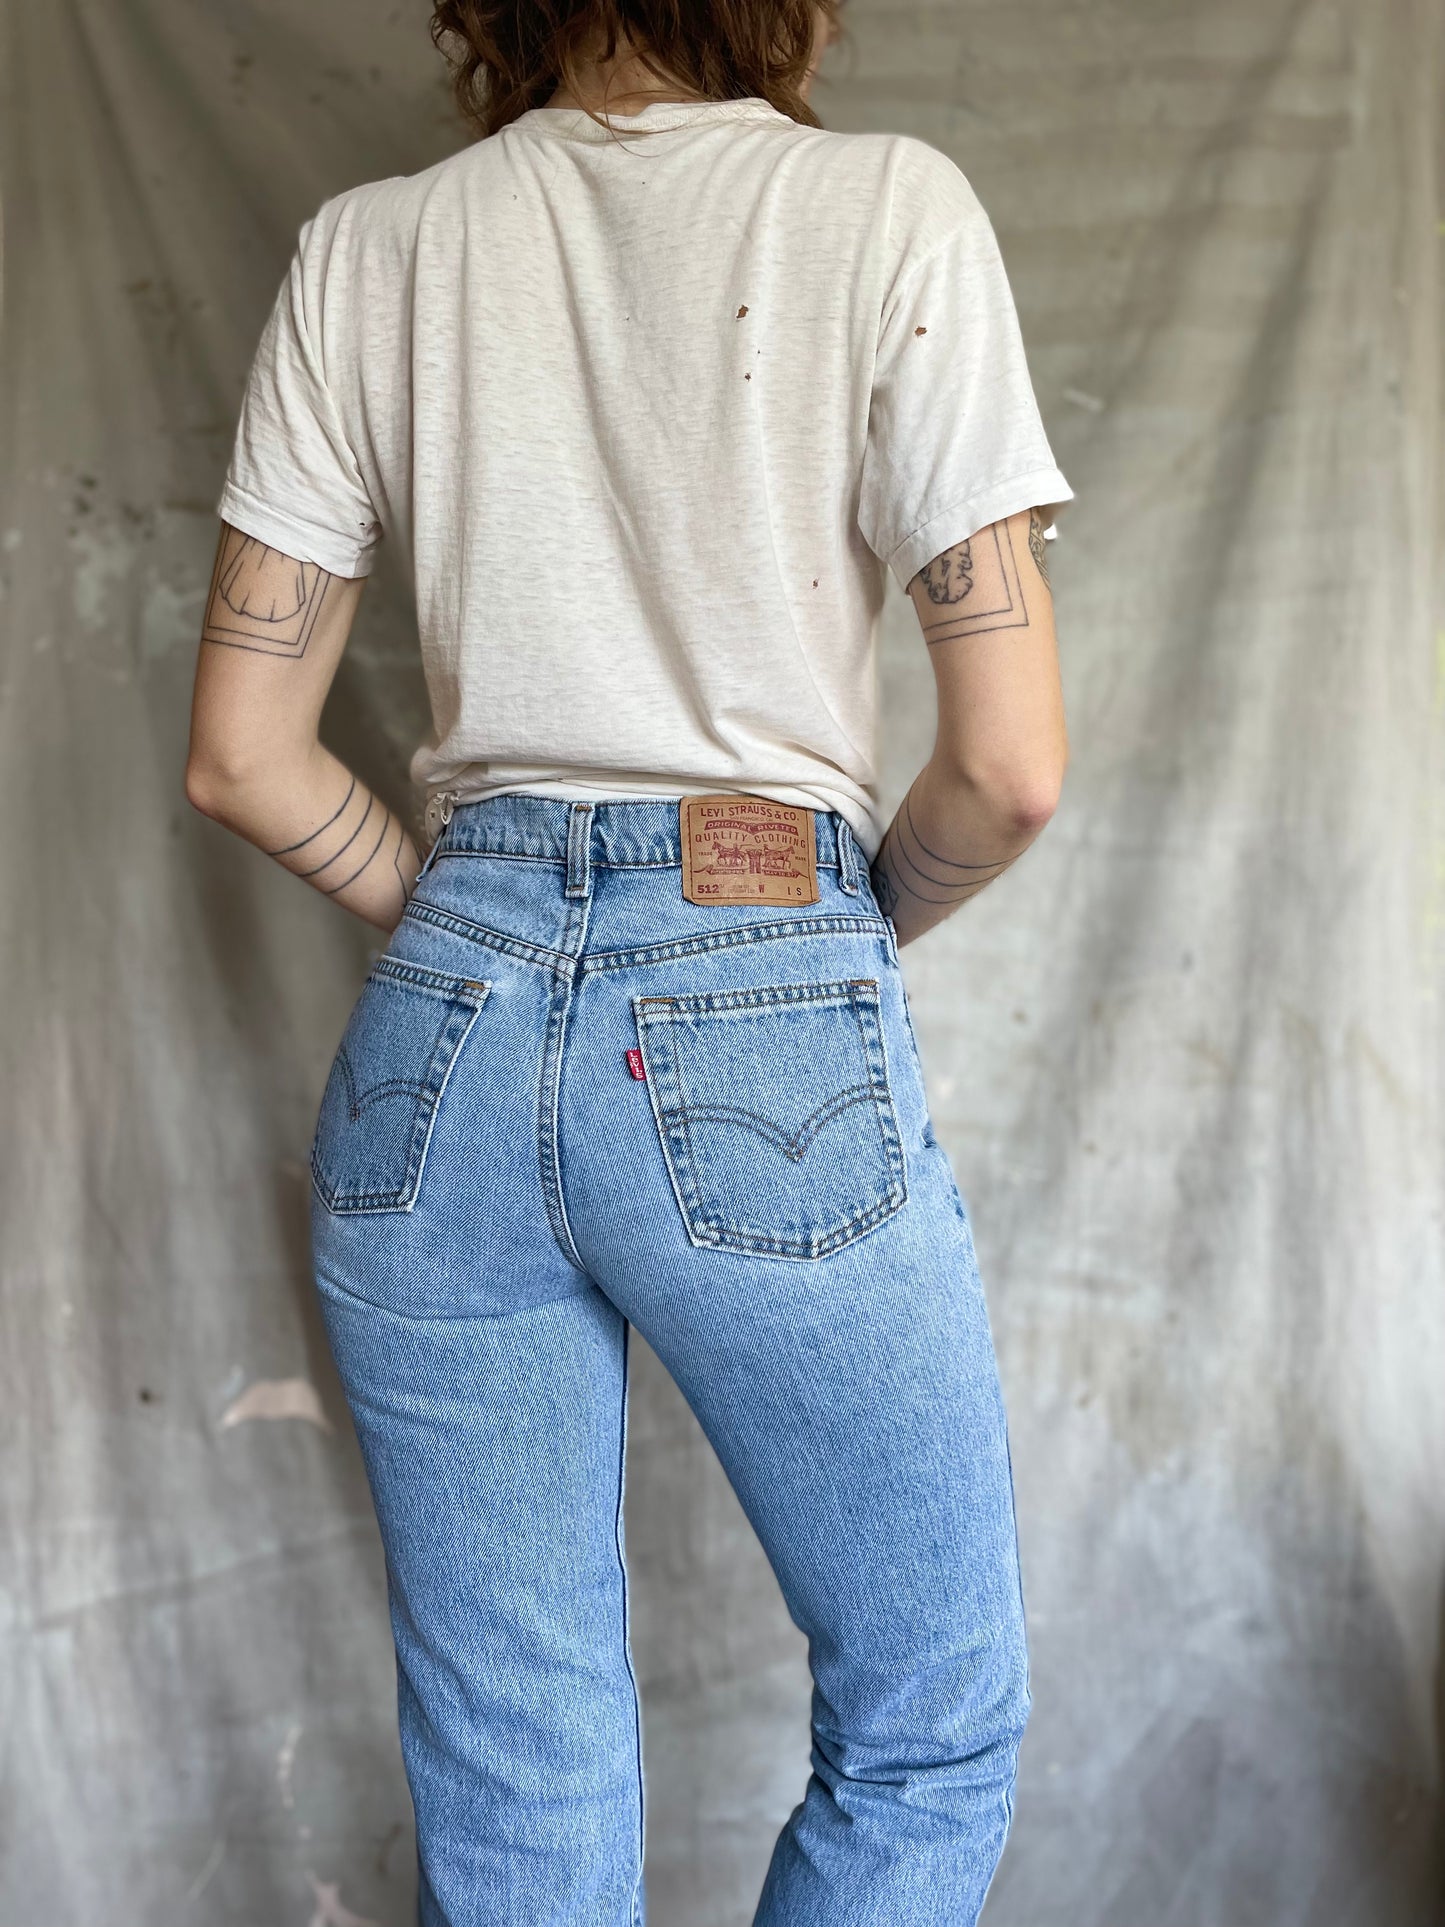 90s Levi’s 512 Tapered Jeans